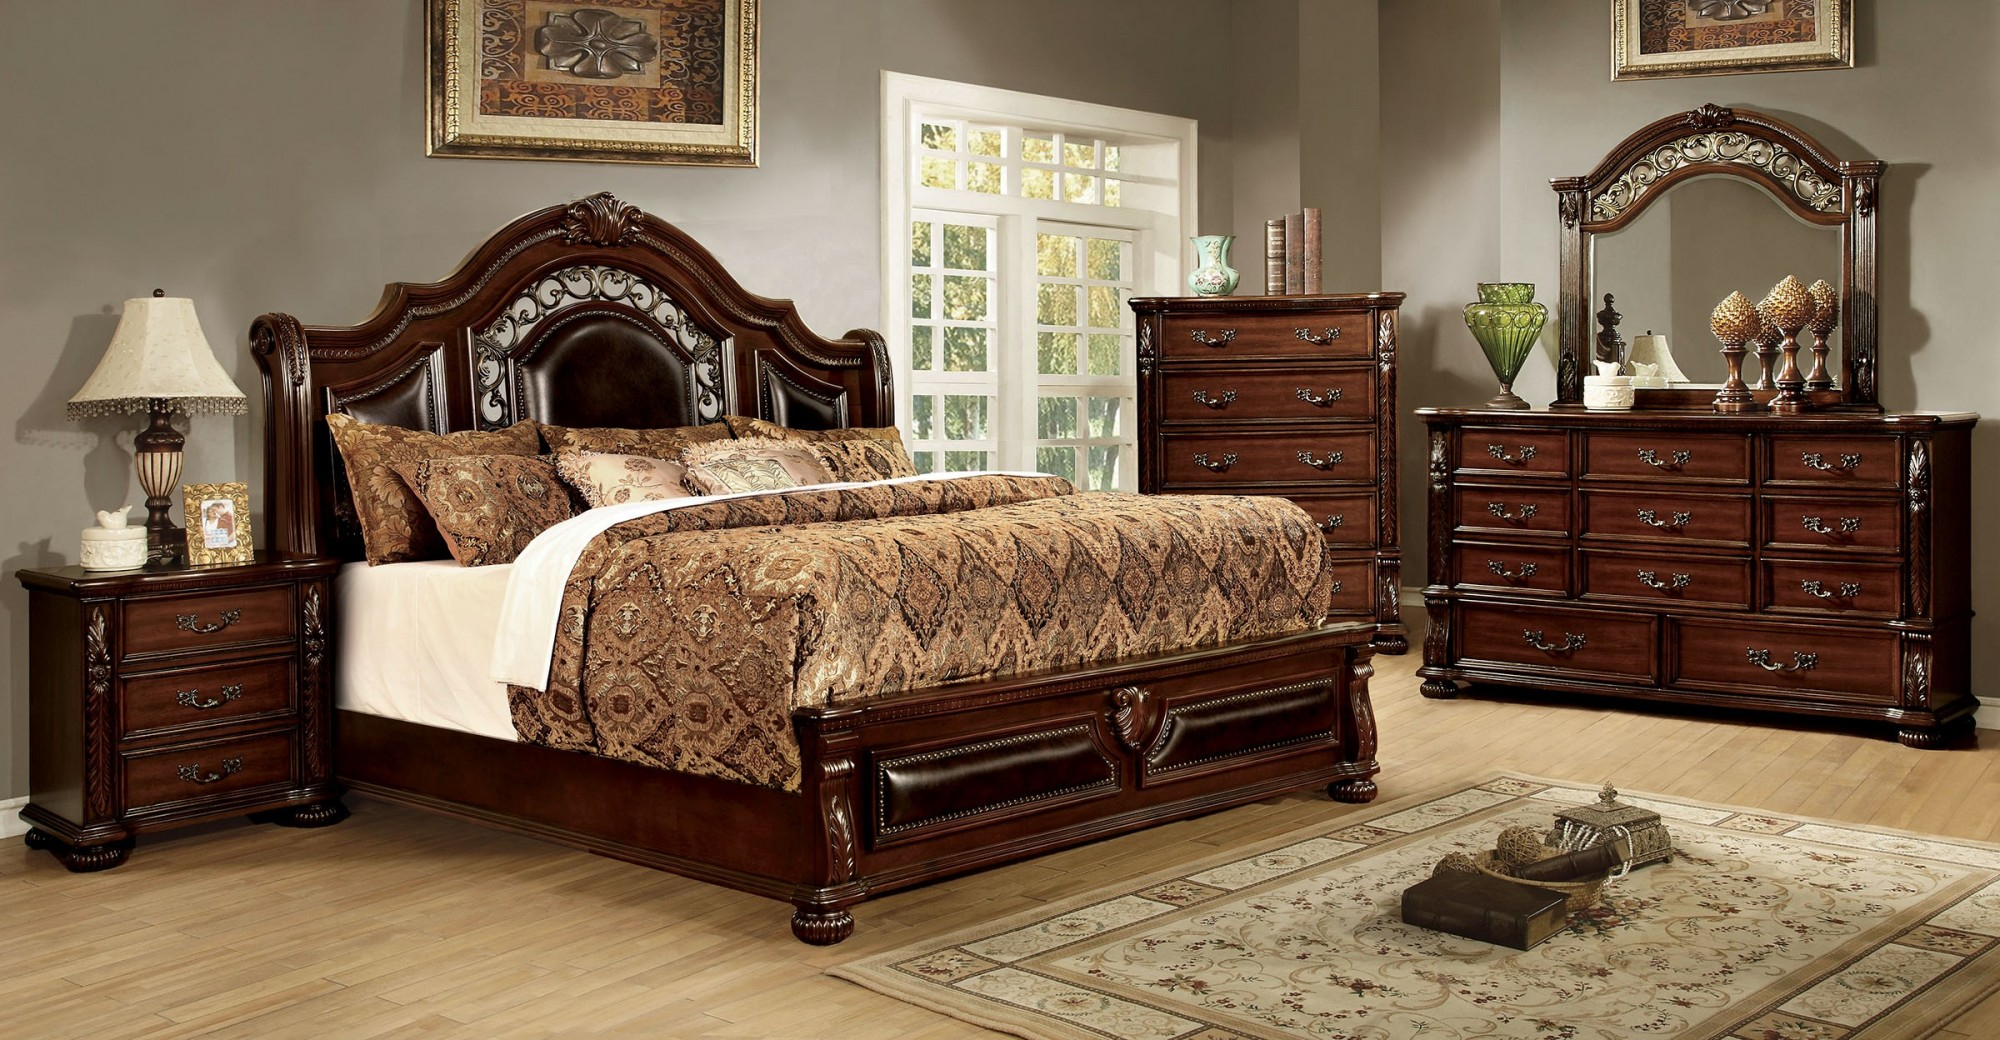 Cm7588 Bedroom Set Traditional Style Brown Cherry Finish intended for size 2000 X 1040